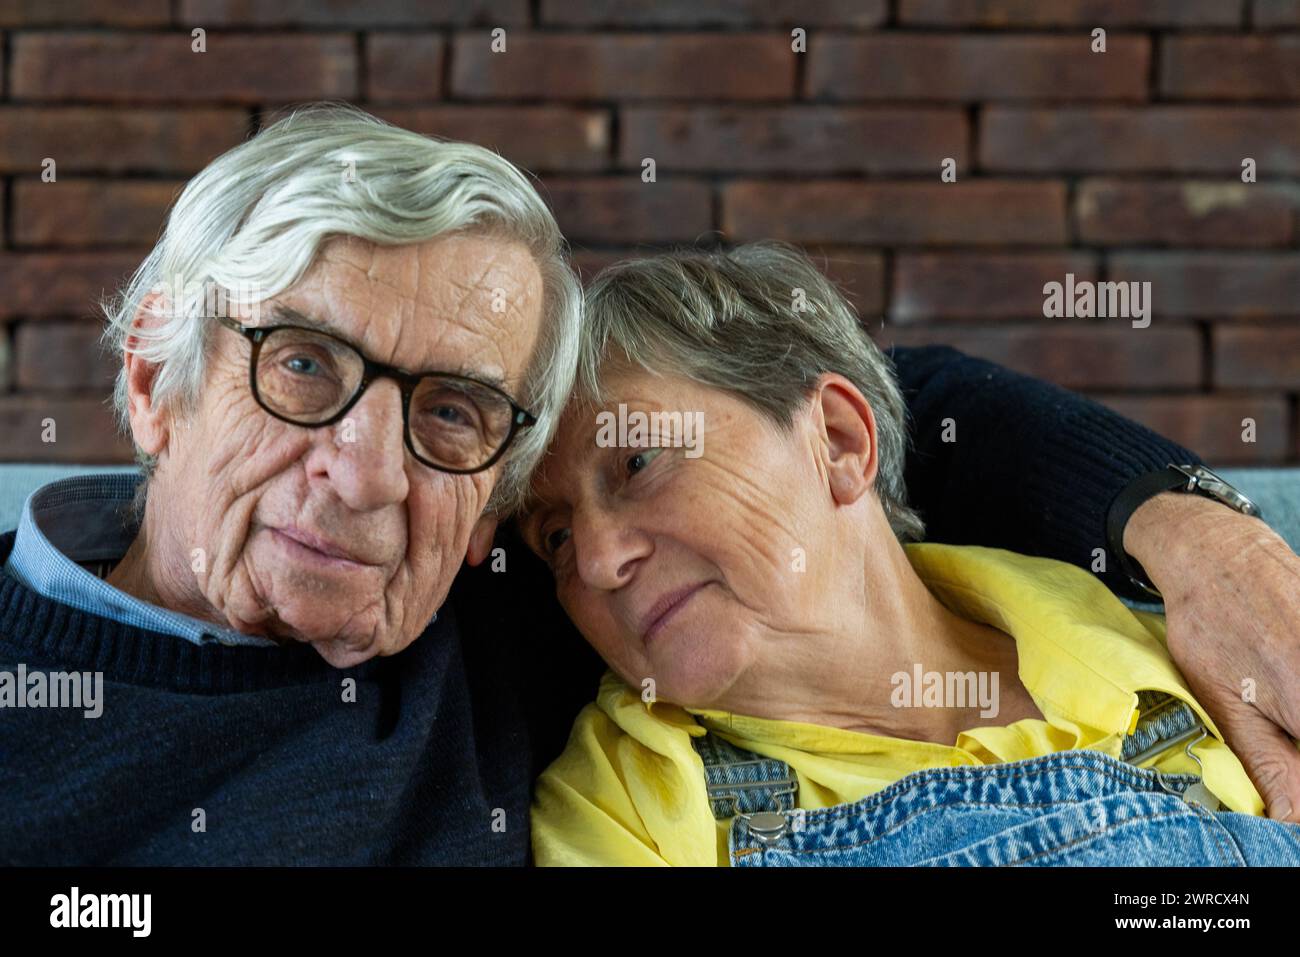 The image depicts an affectionate senior couple leaning on each other in a moment of relaxed intimacy. The man, with silver hair and glasses, shares the frame with a woman wearing a yellow top and denim overalls. Both appear content and comfortable with one another. The backdrop of a brick wall adds a rustic and homely feel to the scene, suggesting a setting of warmth and familiarity. Senior Couple Relaxed and Close Together. High quality photo Stock Photo